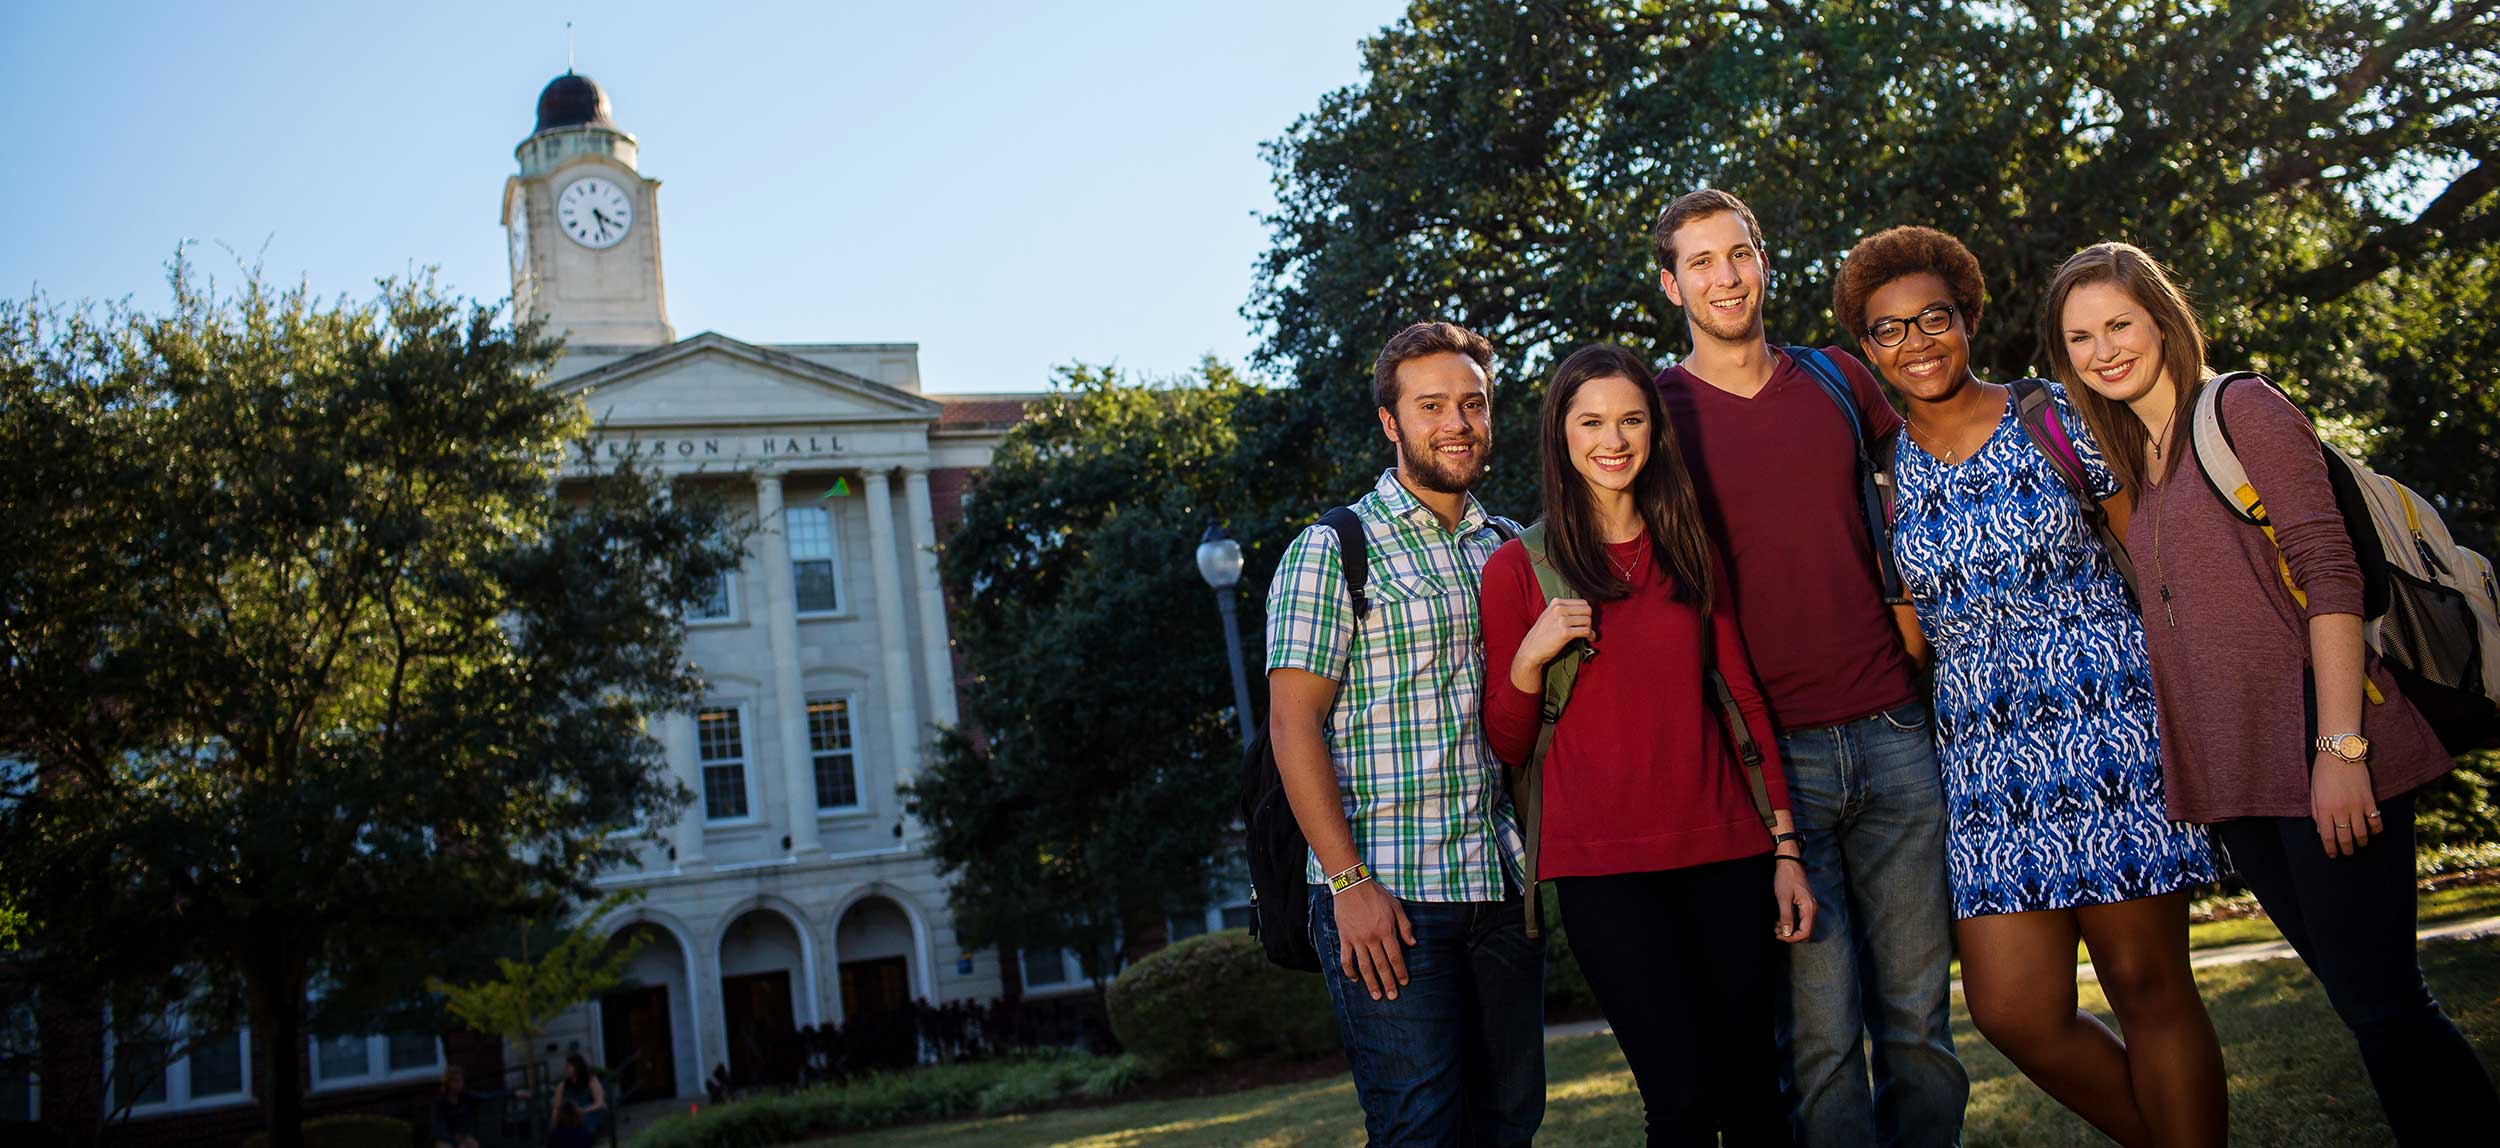 At a Glance About MC Mississippi College